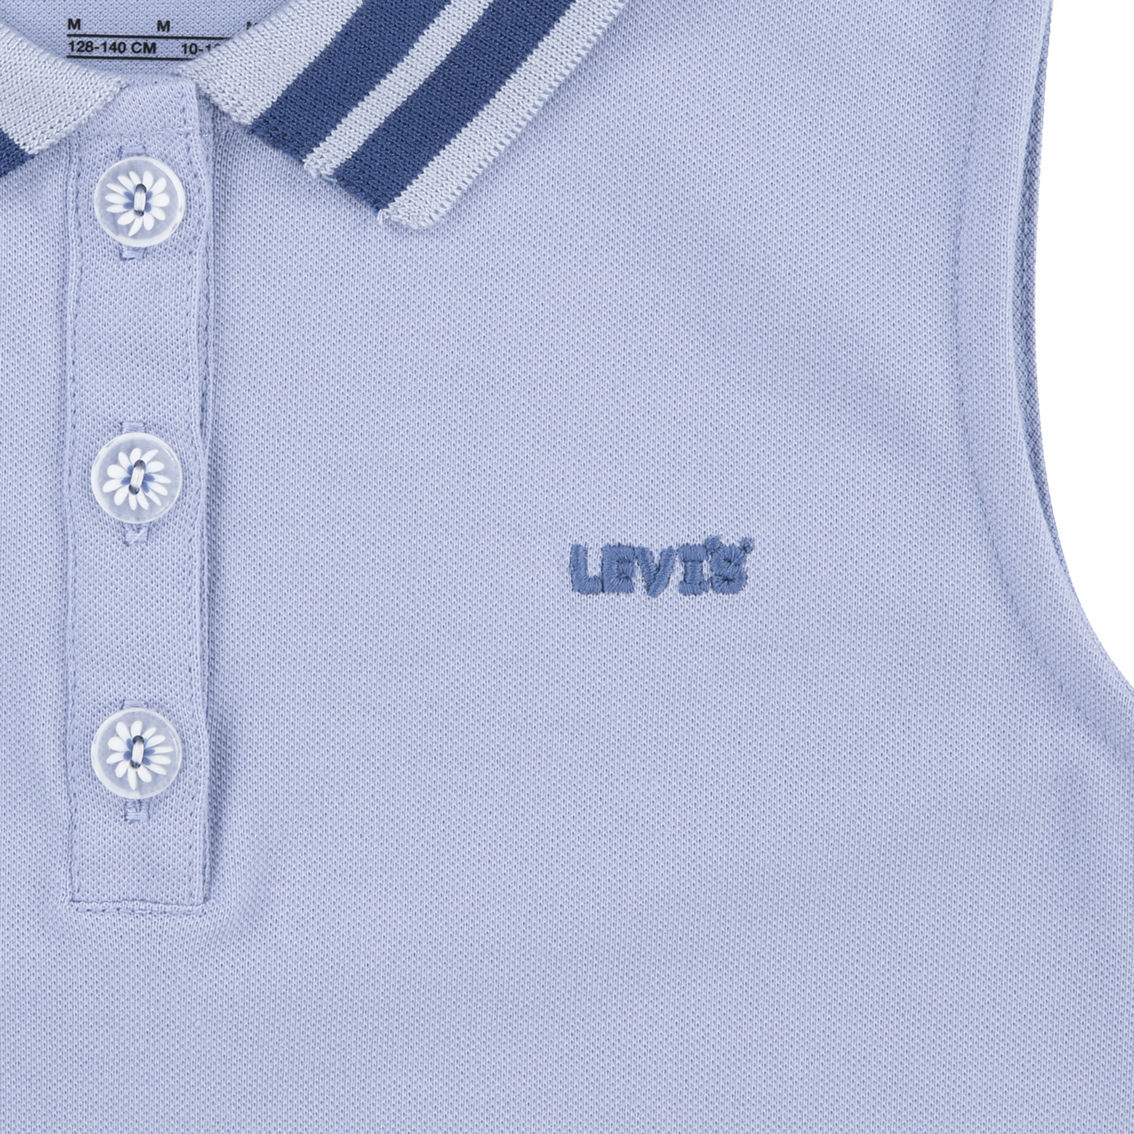 Levi's Girls Polo Tank Top - Image 3 of 3